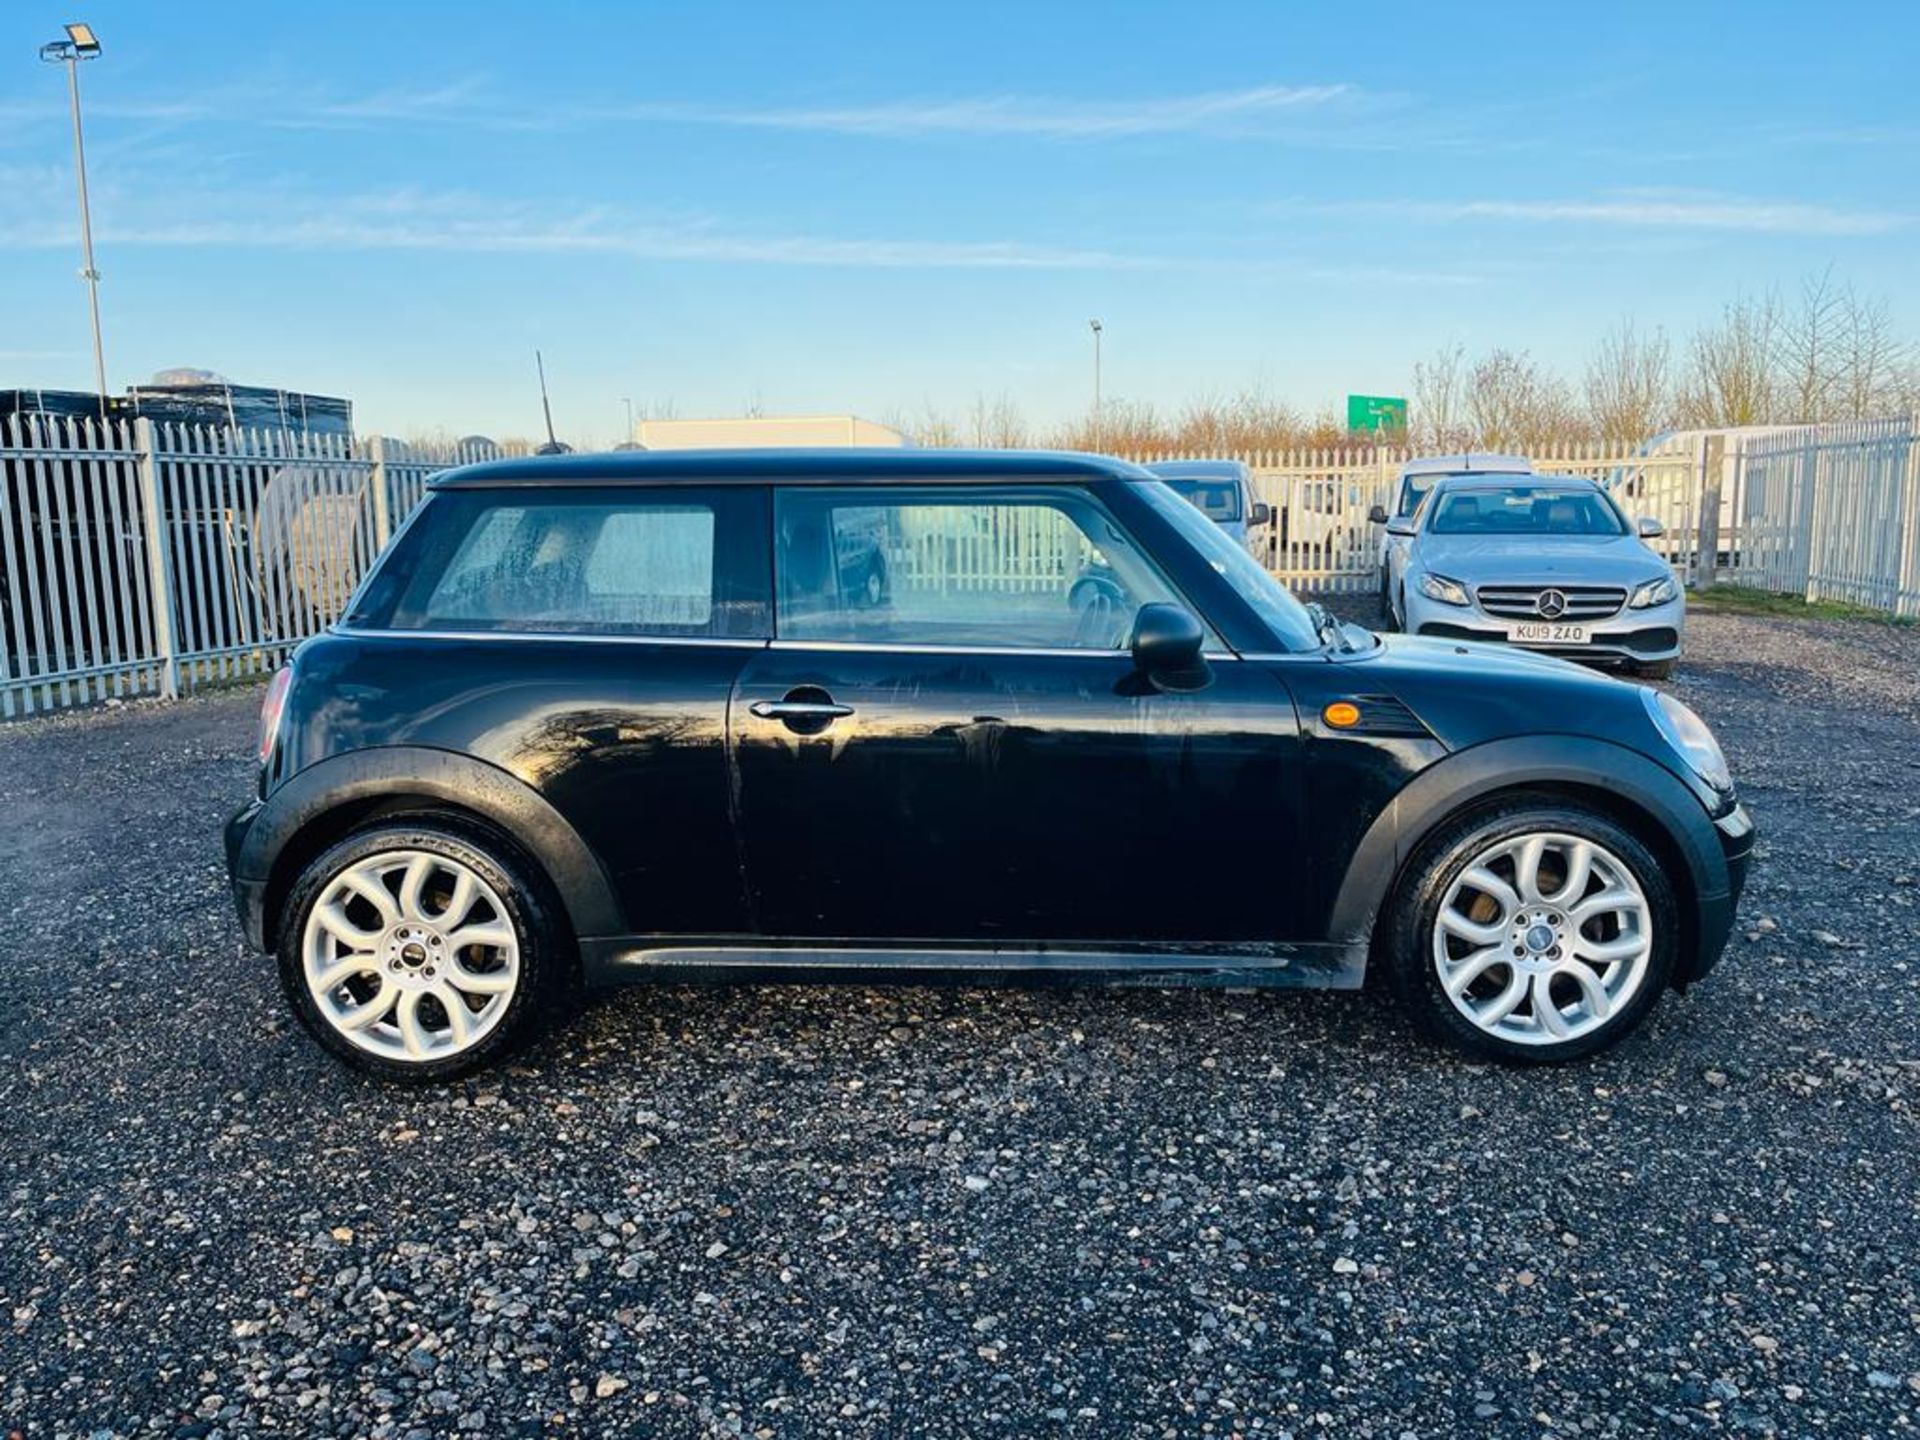 Mini One 1.6 Start/Stop 100 2010 '10 Reg' ' Very Economical' Only 108,430 - Image 10 of 26